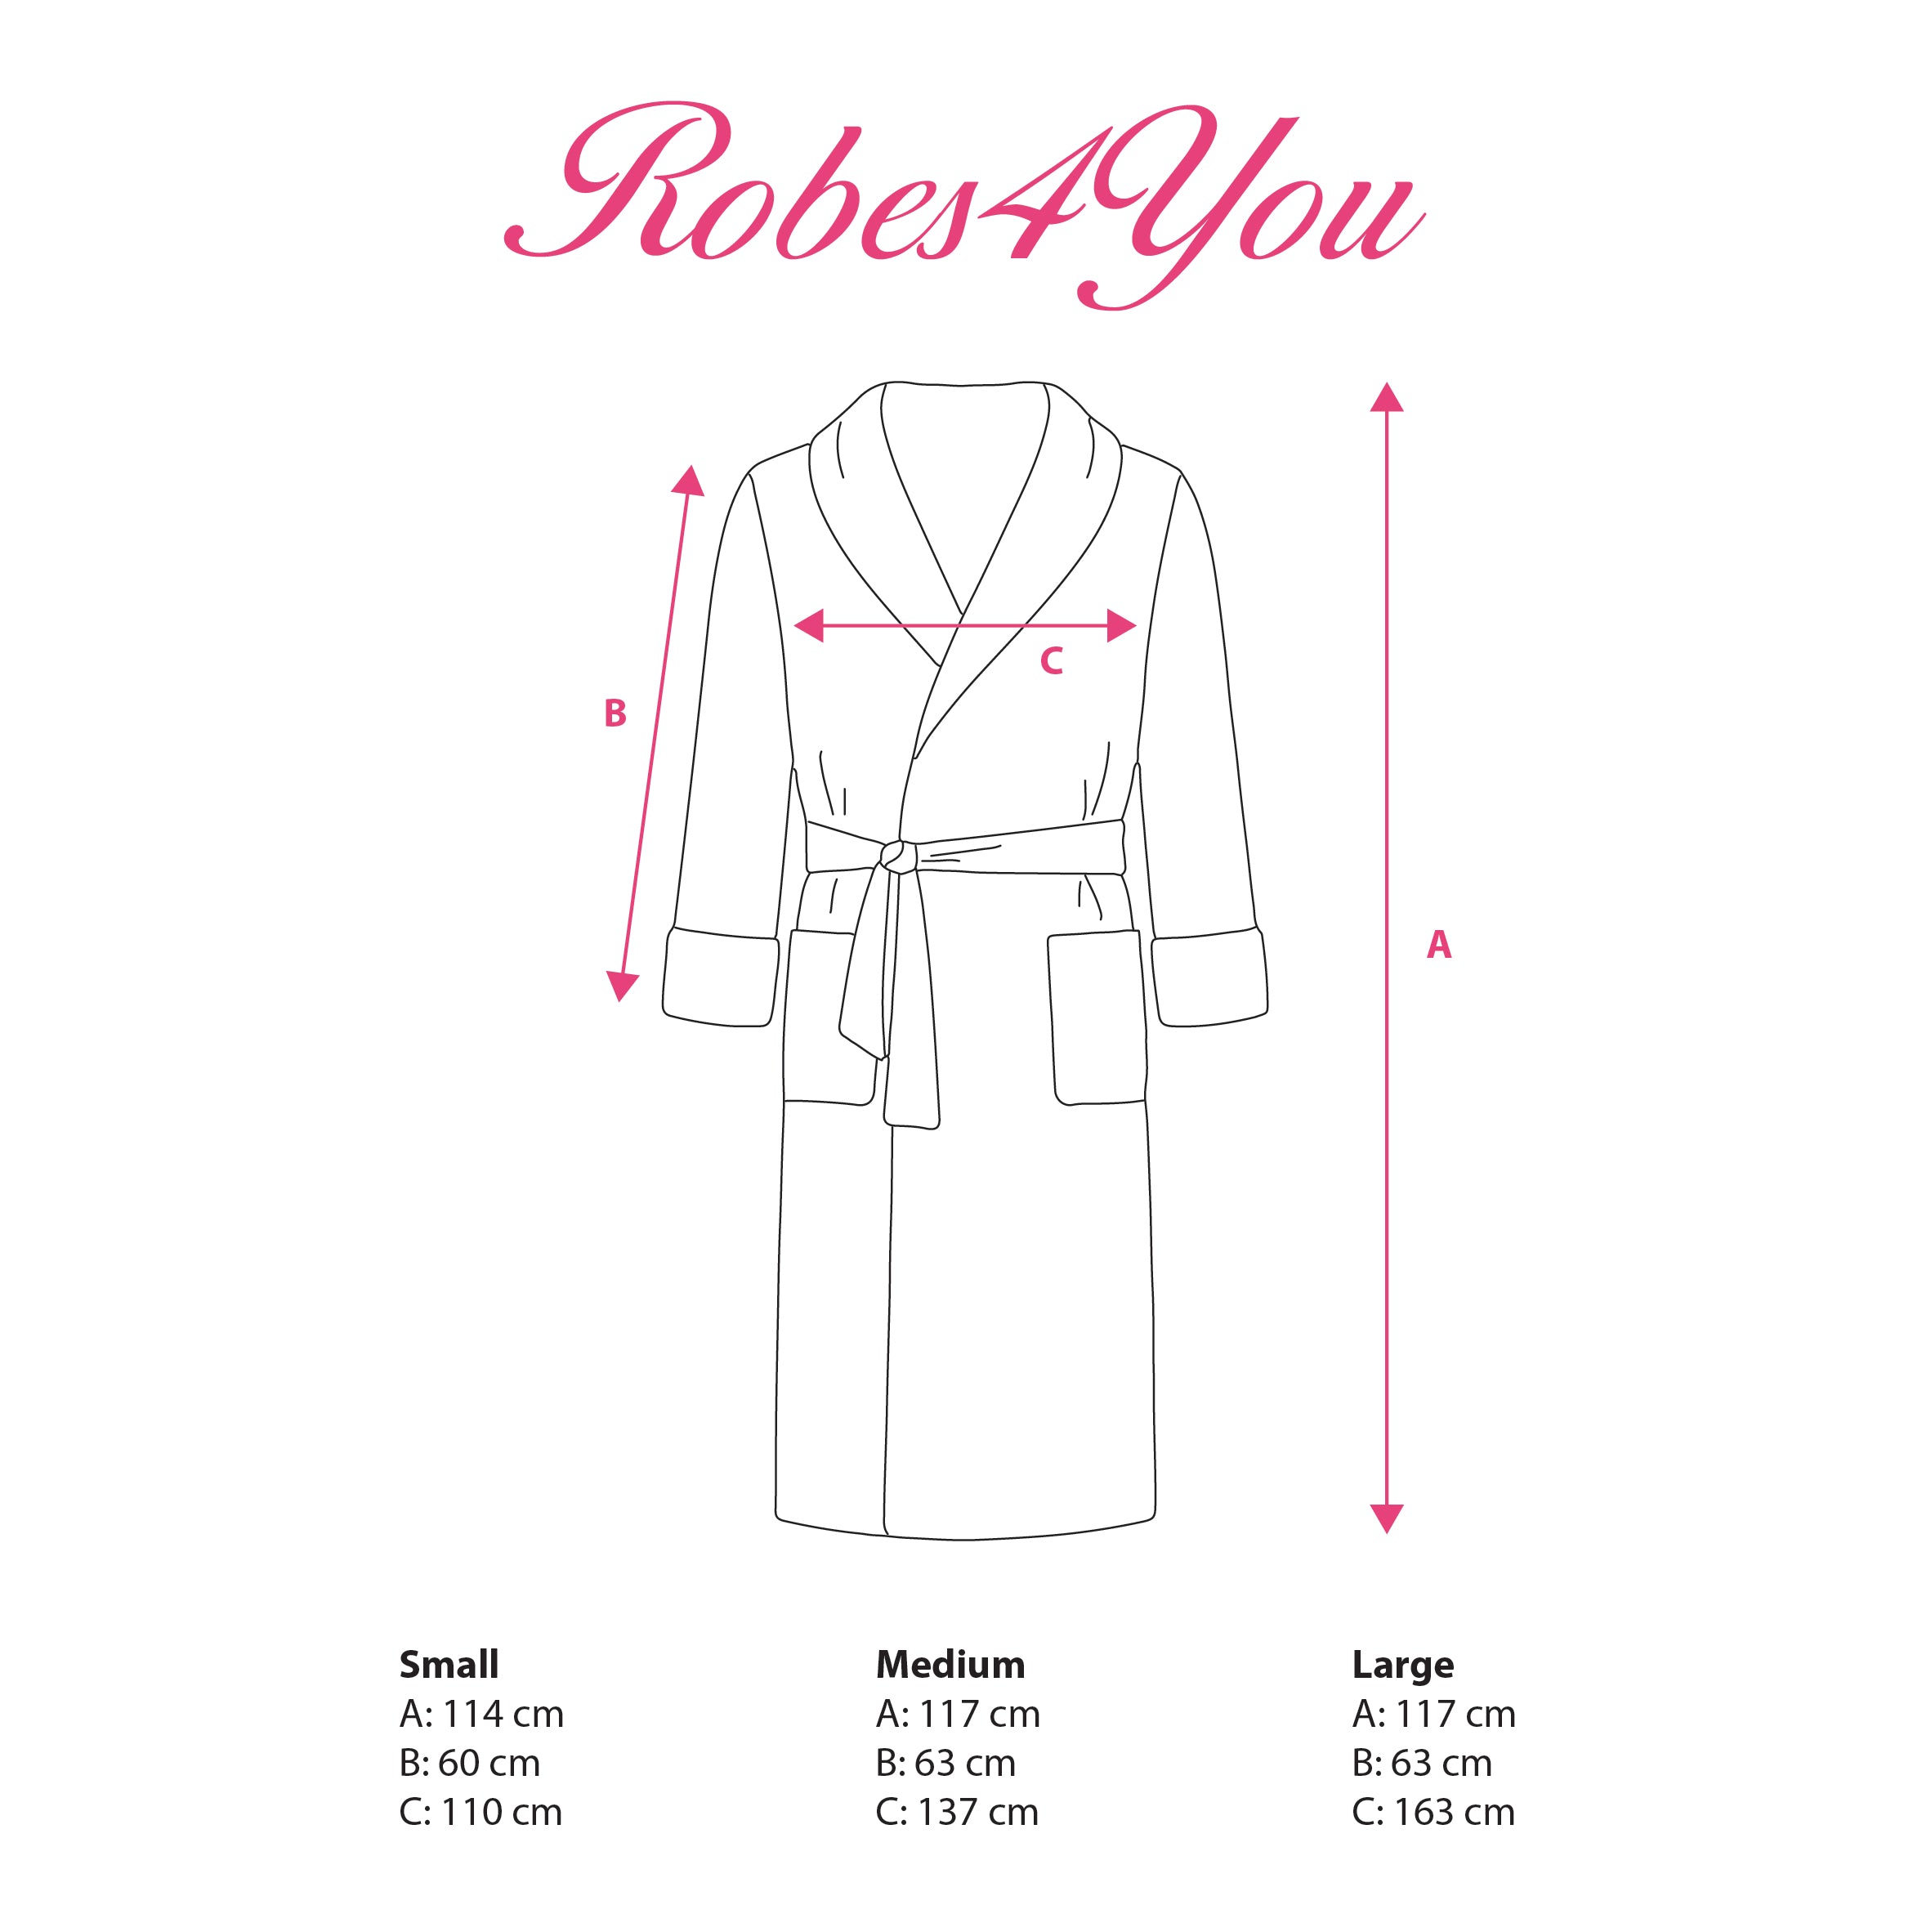 Adults robes sizing-robes4you